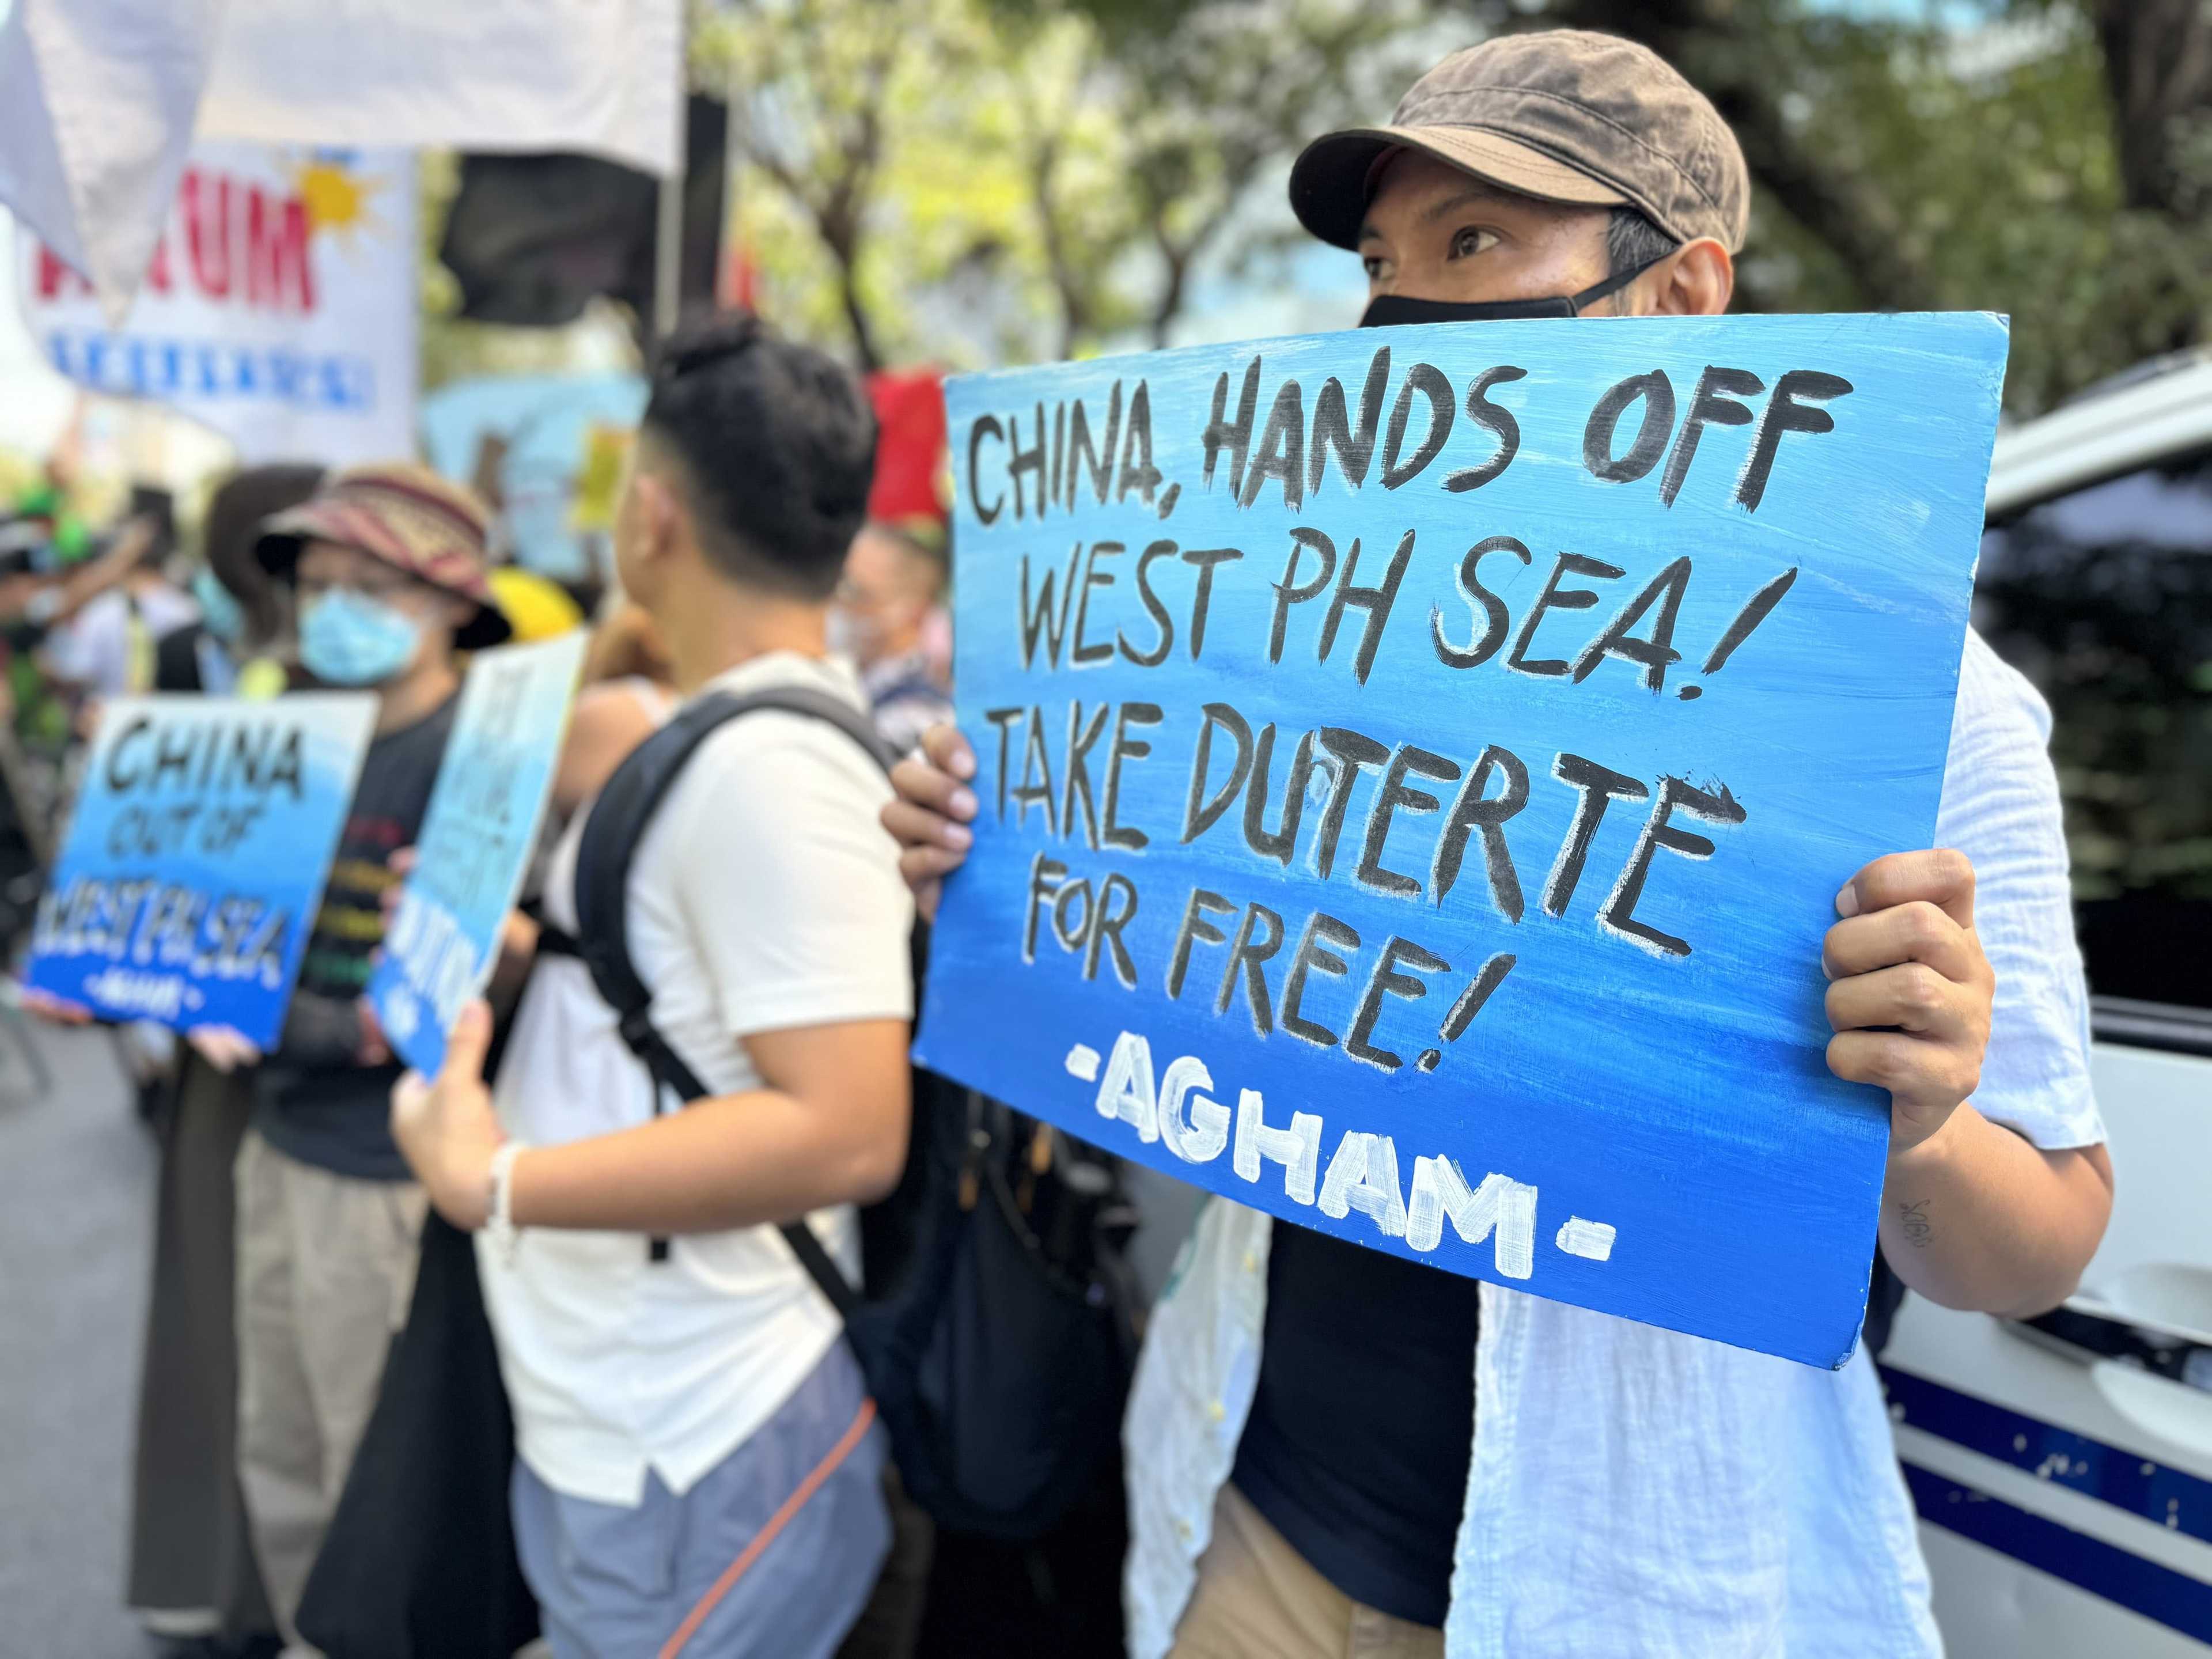 Progressive groups hold protest rally against China's harassment in WPS